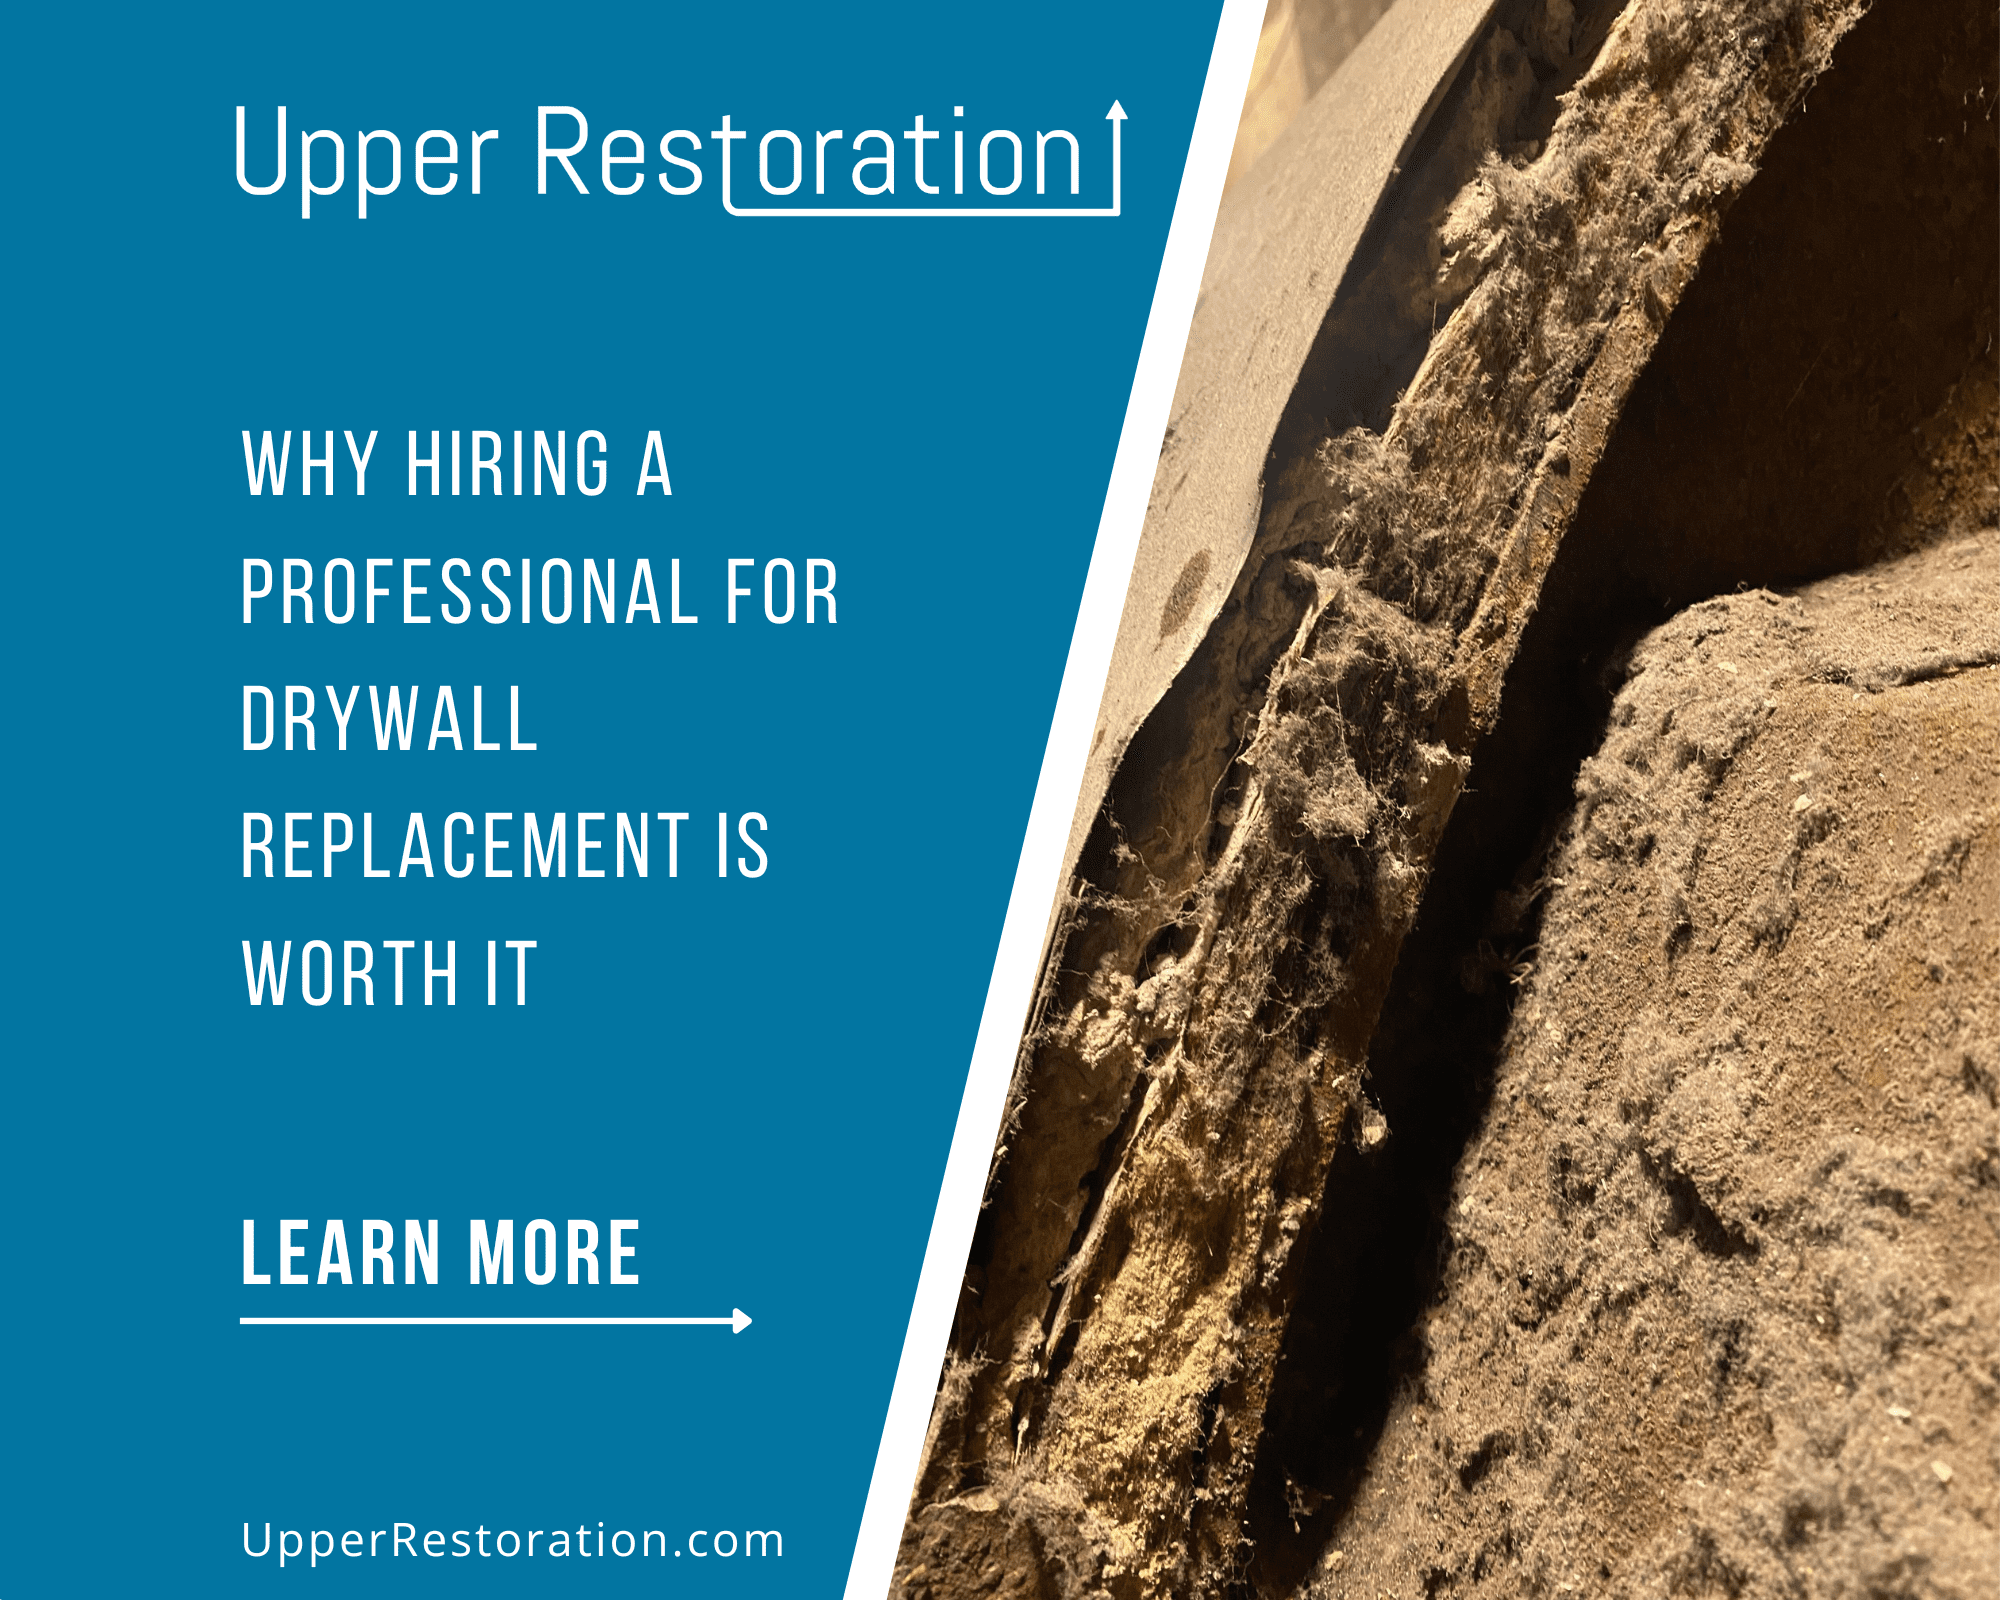 Why Hiring a Professional for Drywall Replacement is Worth It